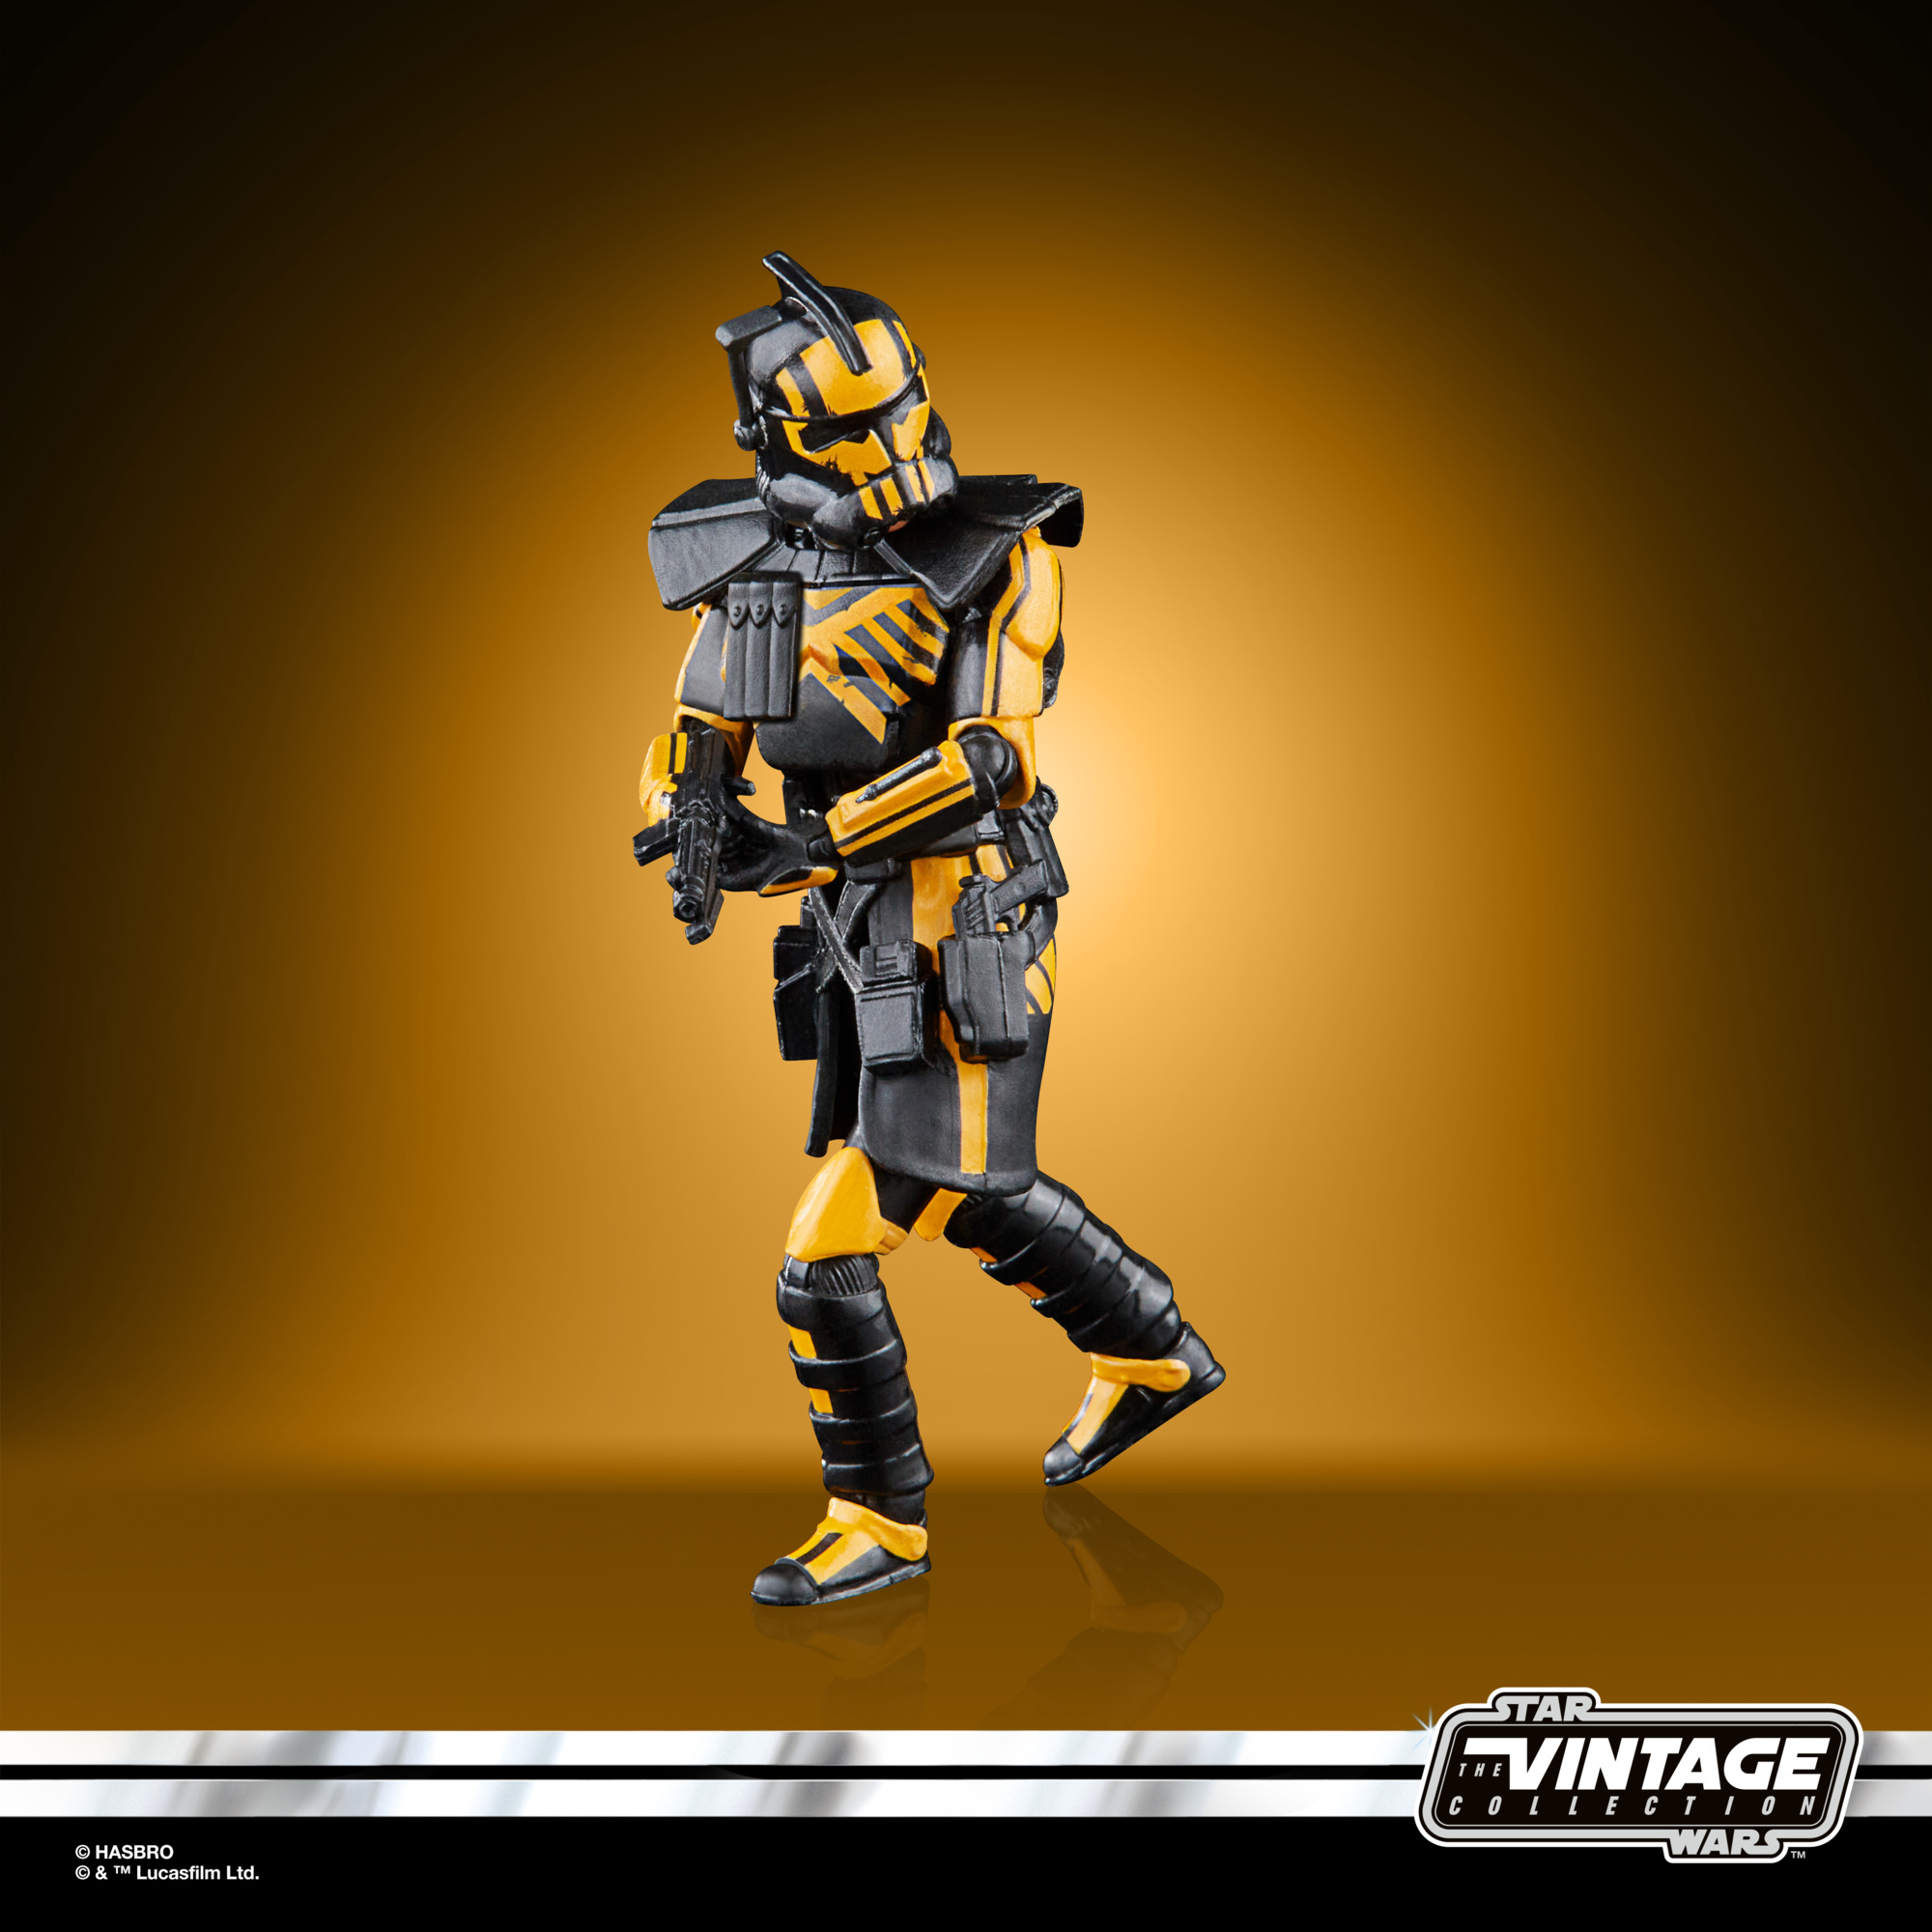 Star Wars The Vintage Collection Gaming Greats ARC Trooper (Umbra Operative) F62535L0 5010994151911